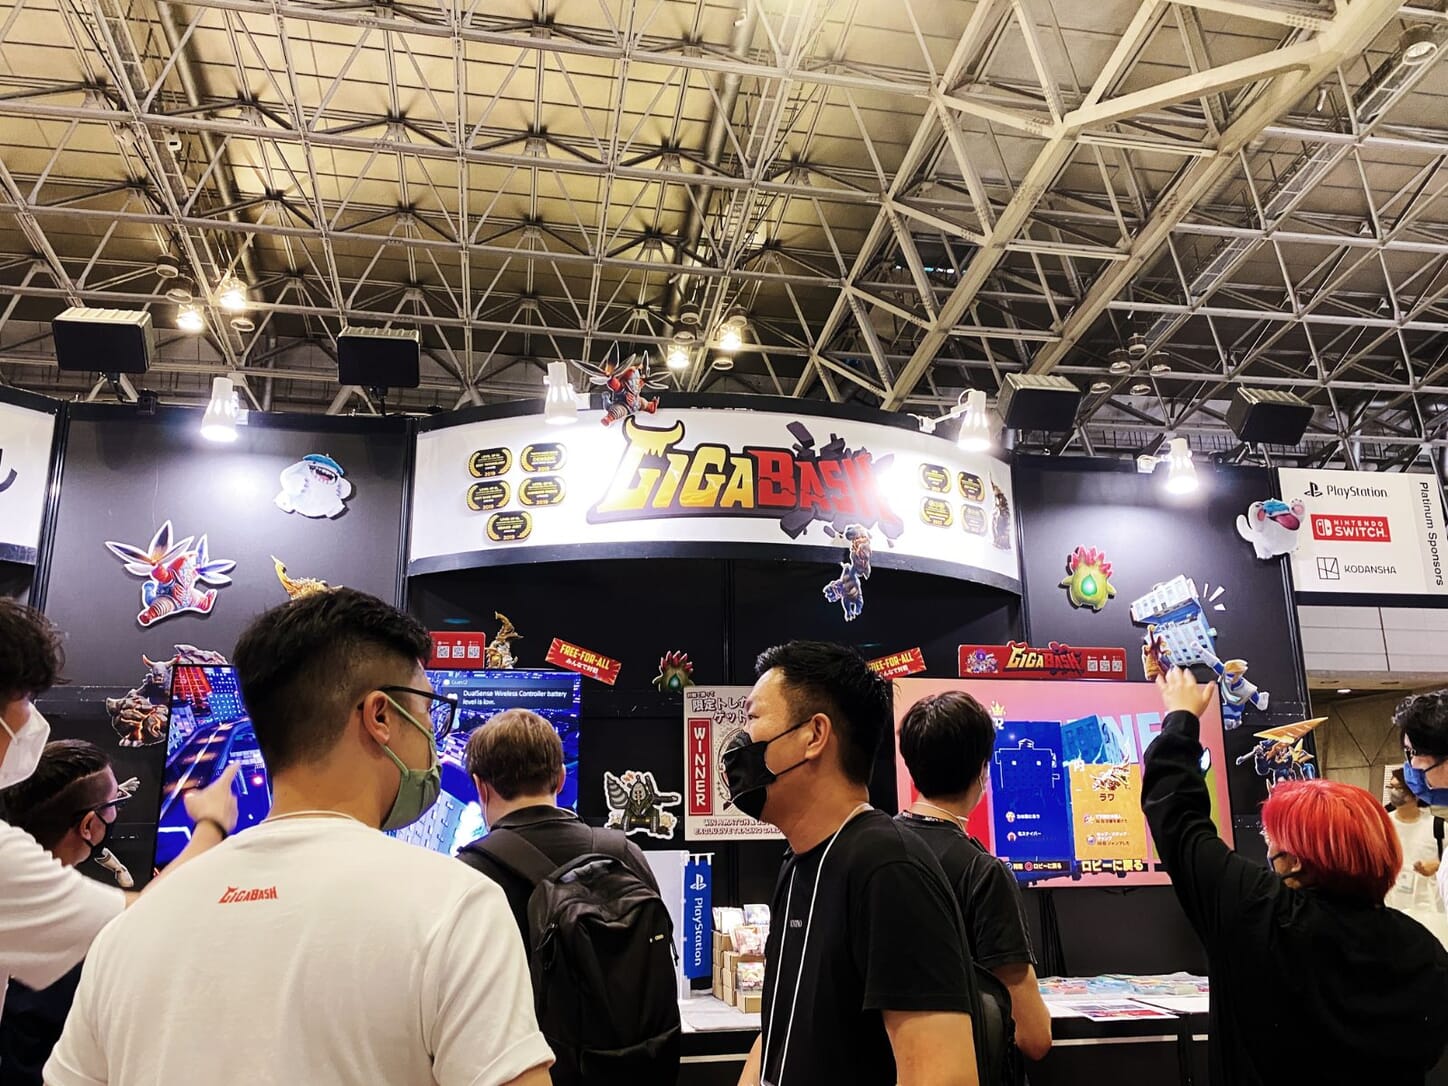 6 Things We Saw on the First Day of Tokyo Game Show 2022